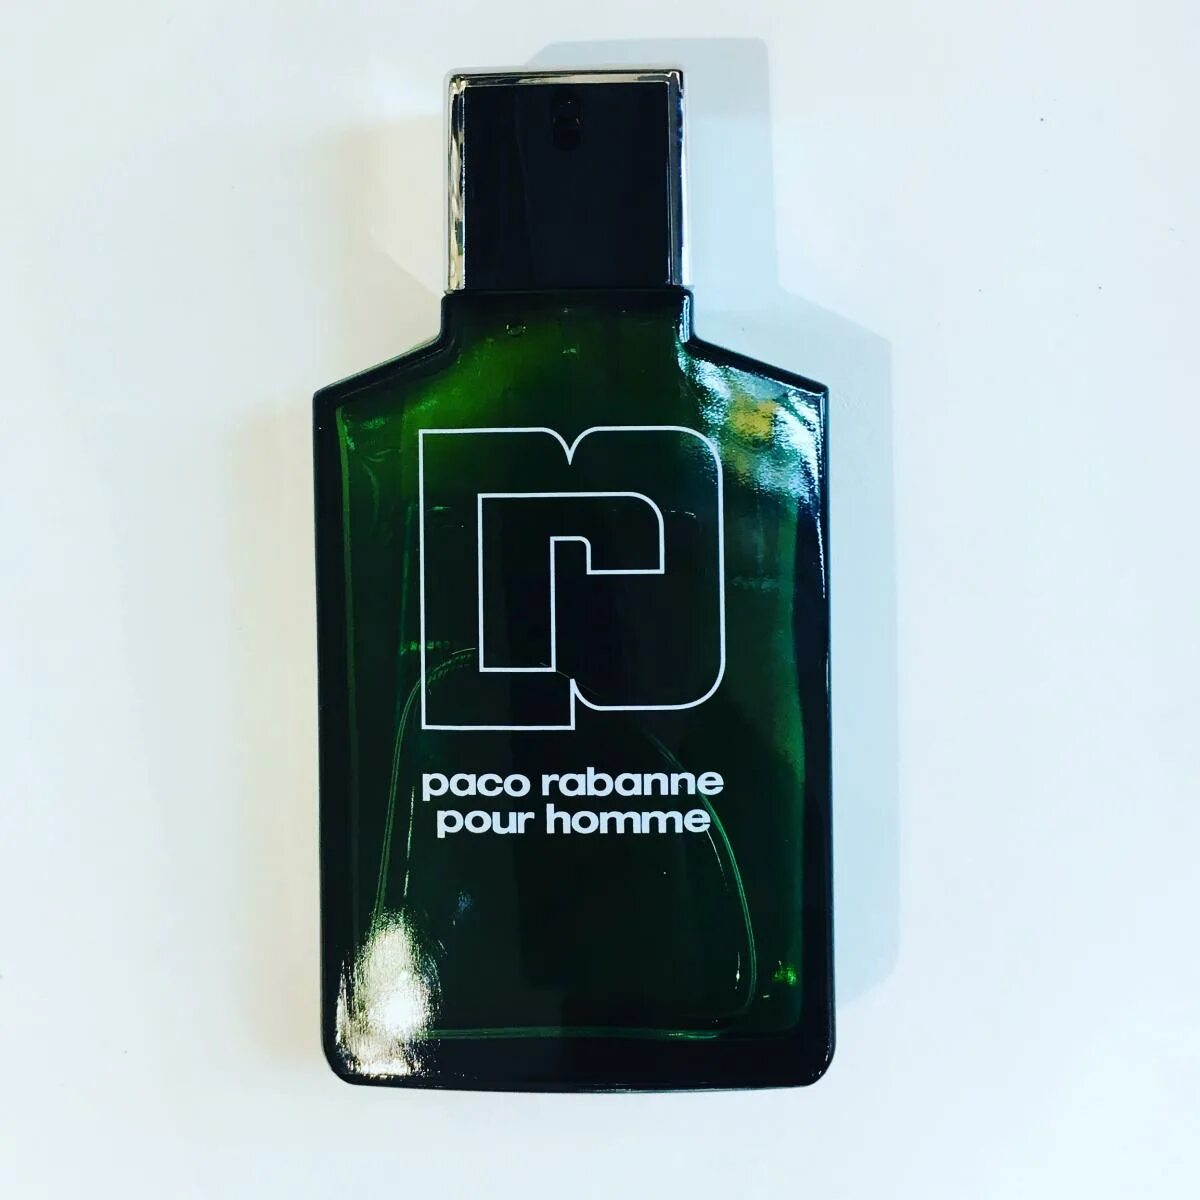 Paco Rabanne pour homme 50ml EDT Spray. Старый аромат Paco Rabanne Pure Home. Paco Rabanne pour homme образы. Аромат Пако Рабан мужской 1973 года. Rabanne pour homme